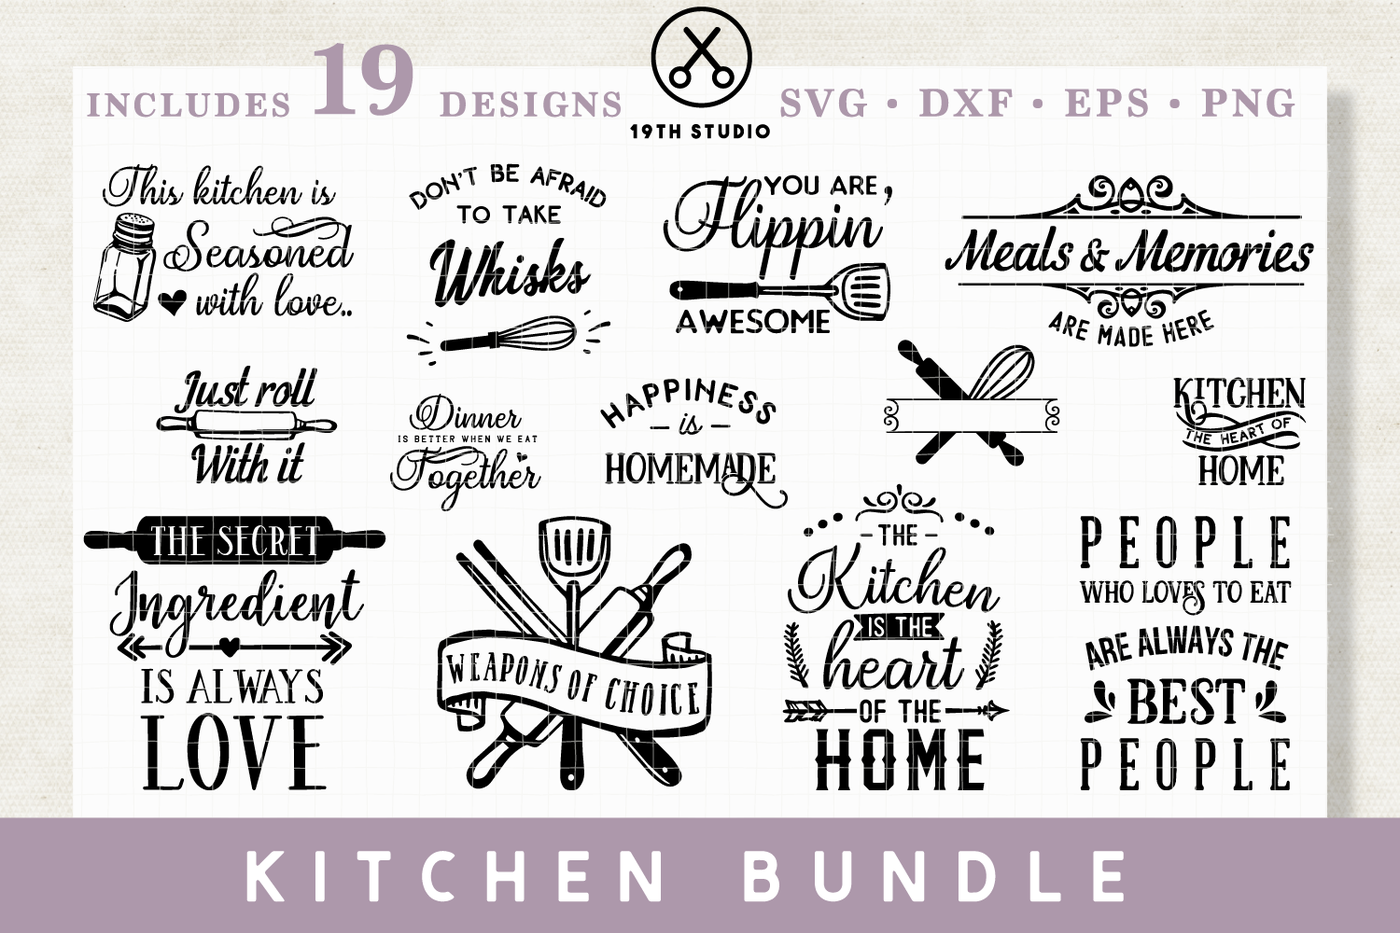 New Download Free Svg Files Creative Fabrica Kitchen Seasoned With Love Svg